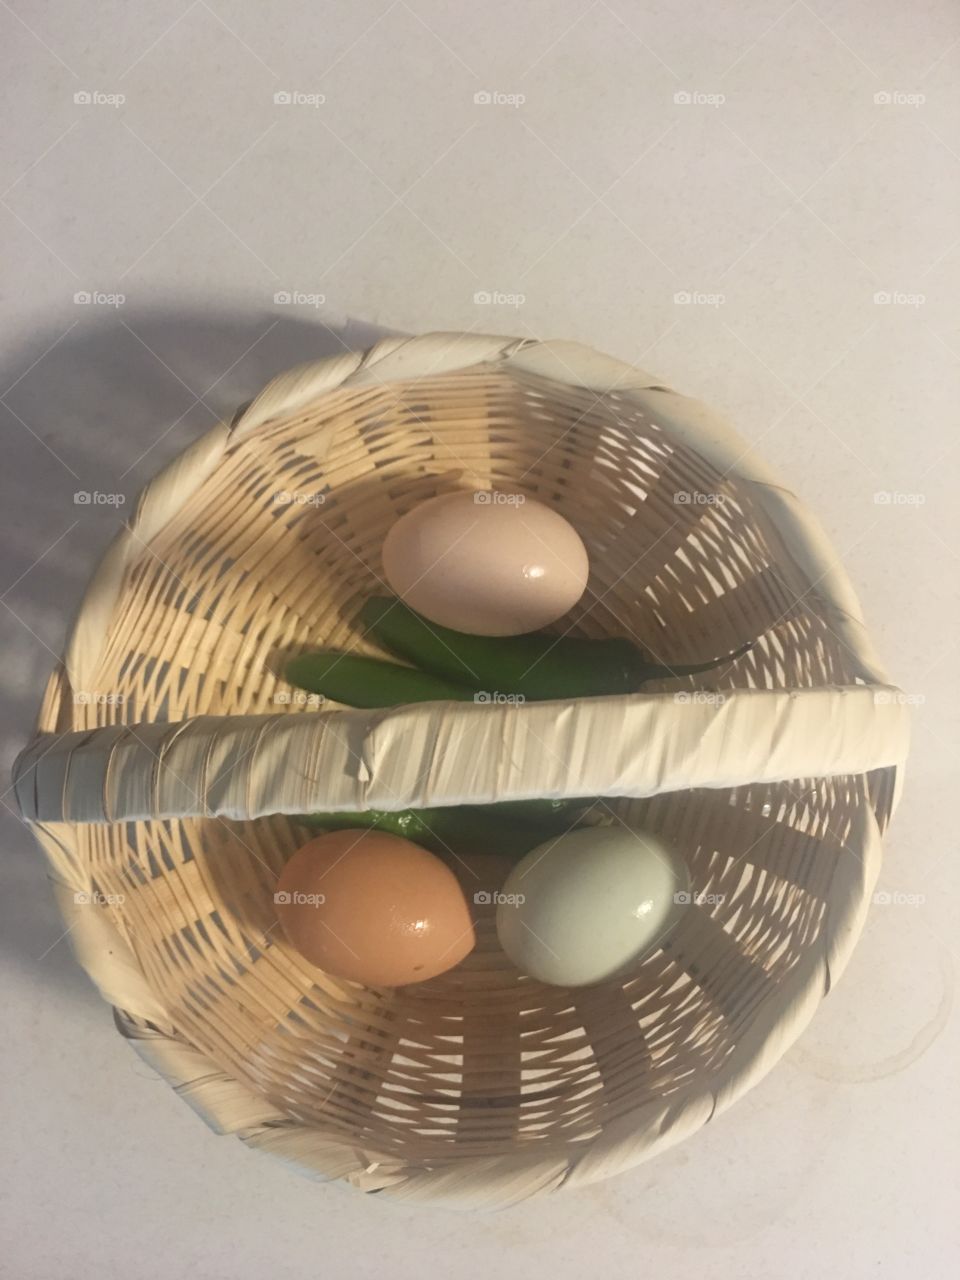 Eggs with different colors 